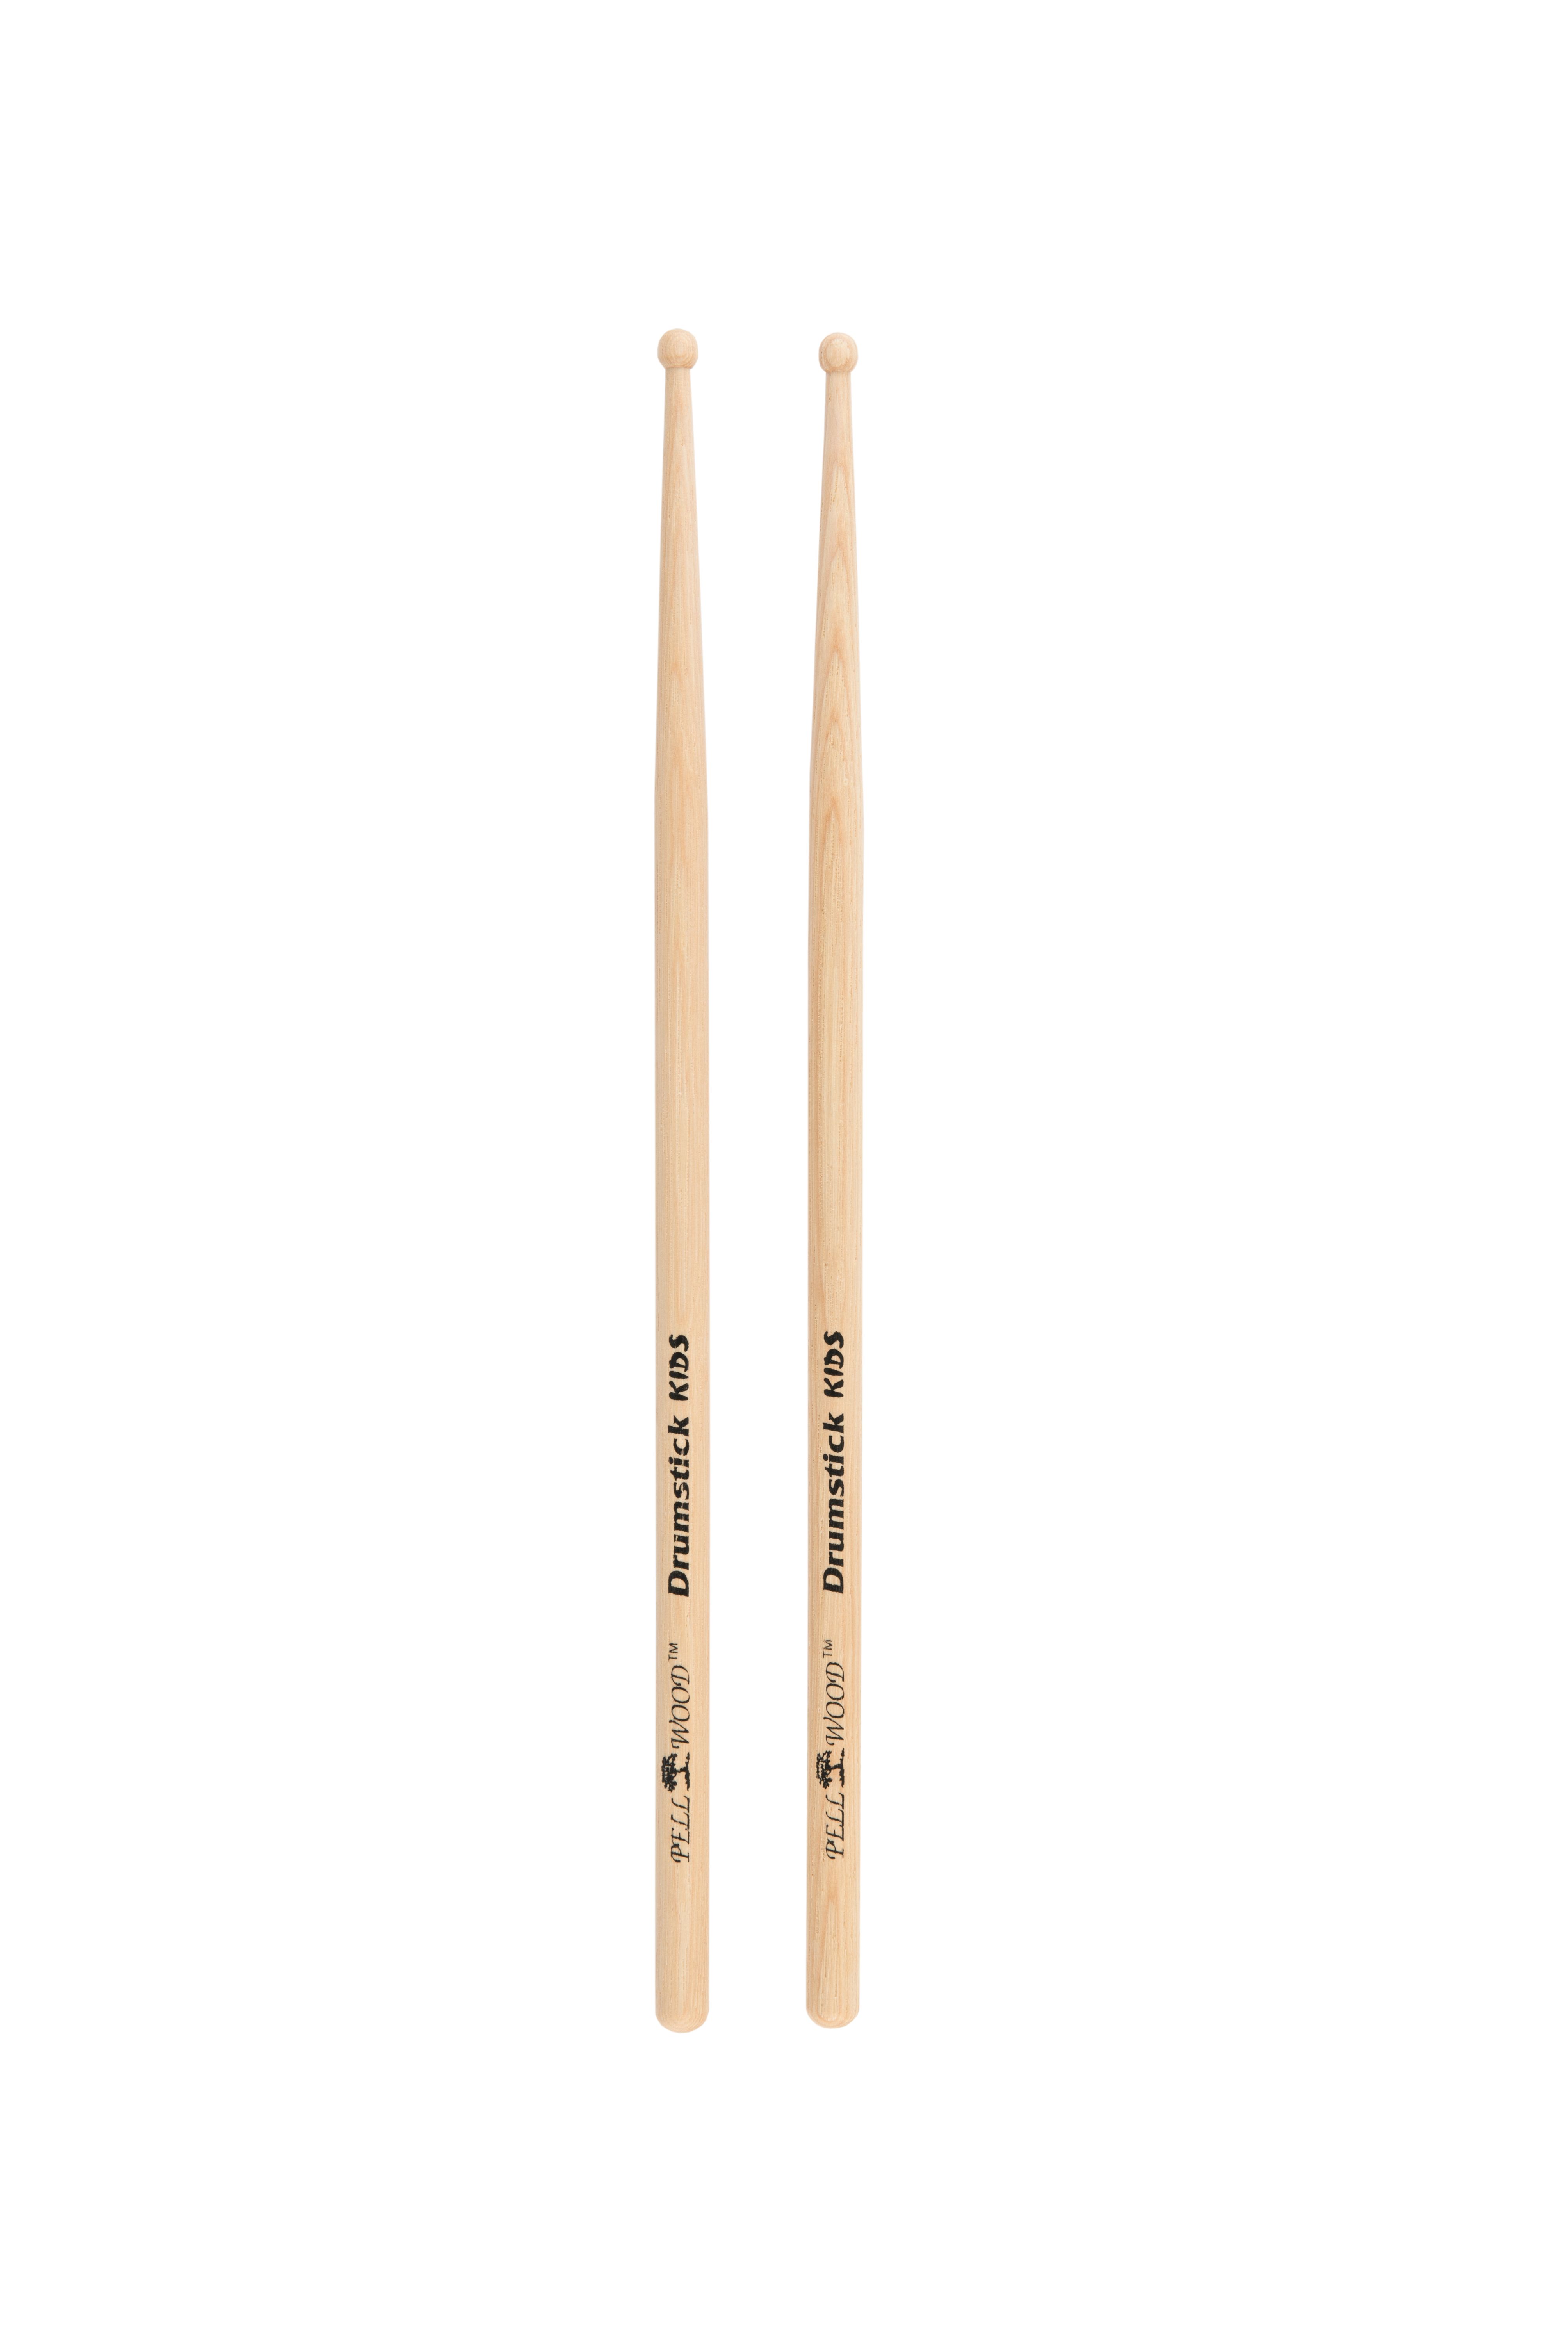 Drumstick for Kids X-LINE 4 pairs